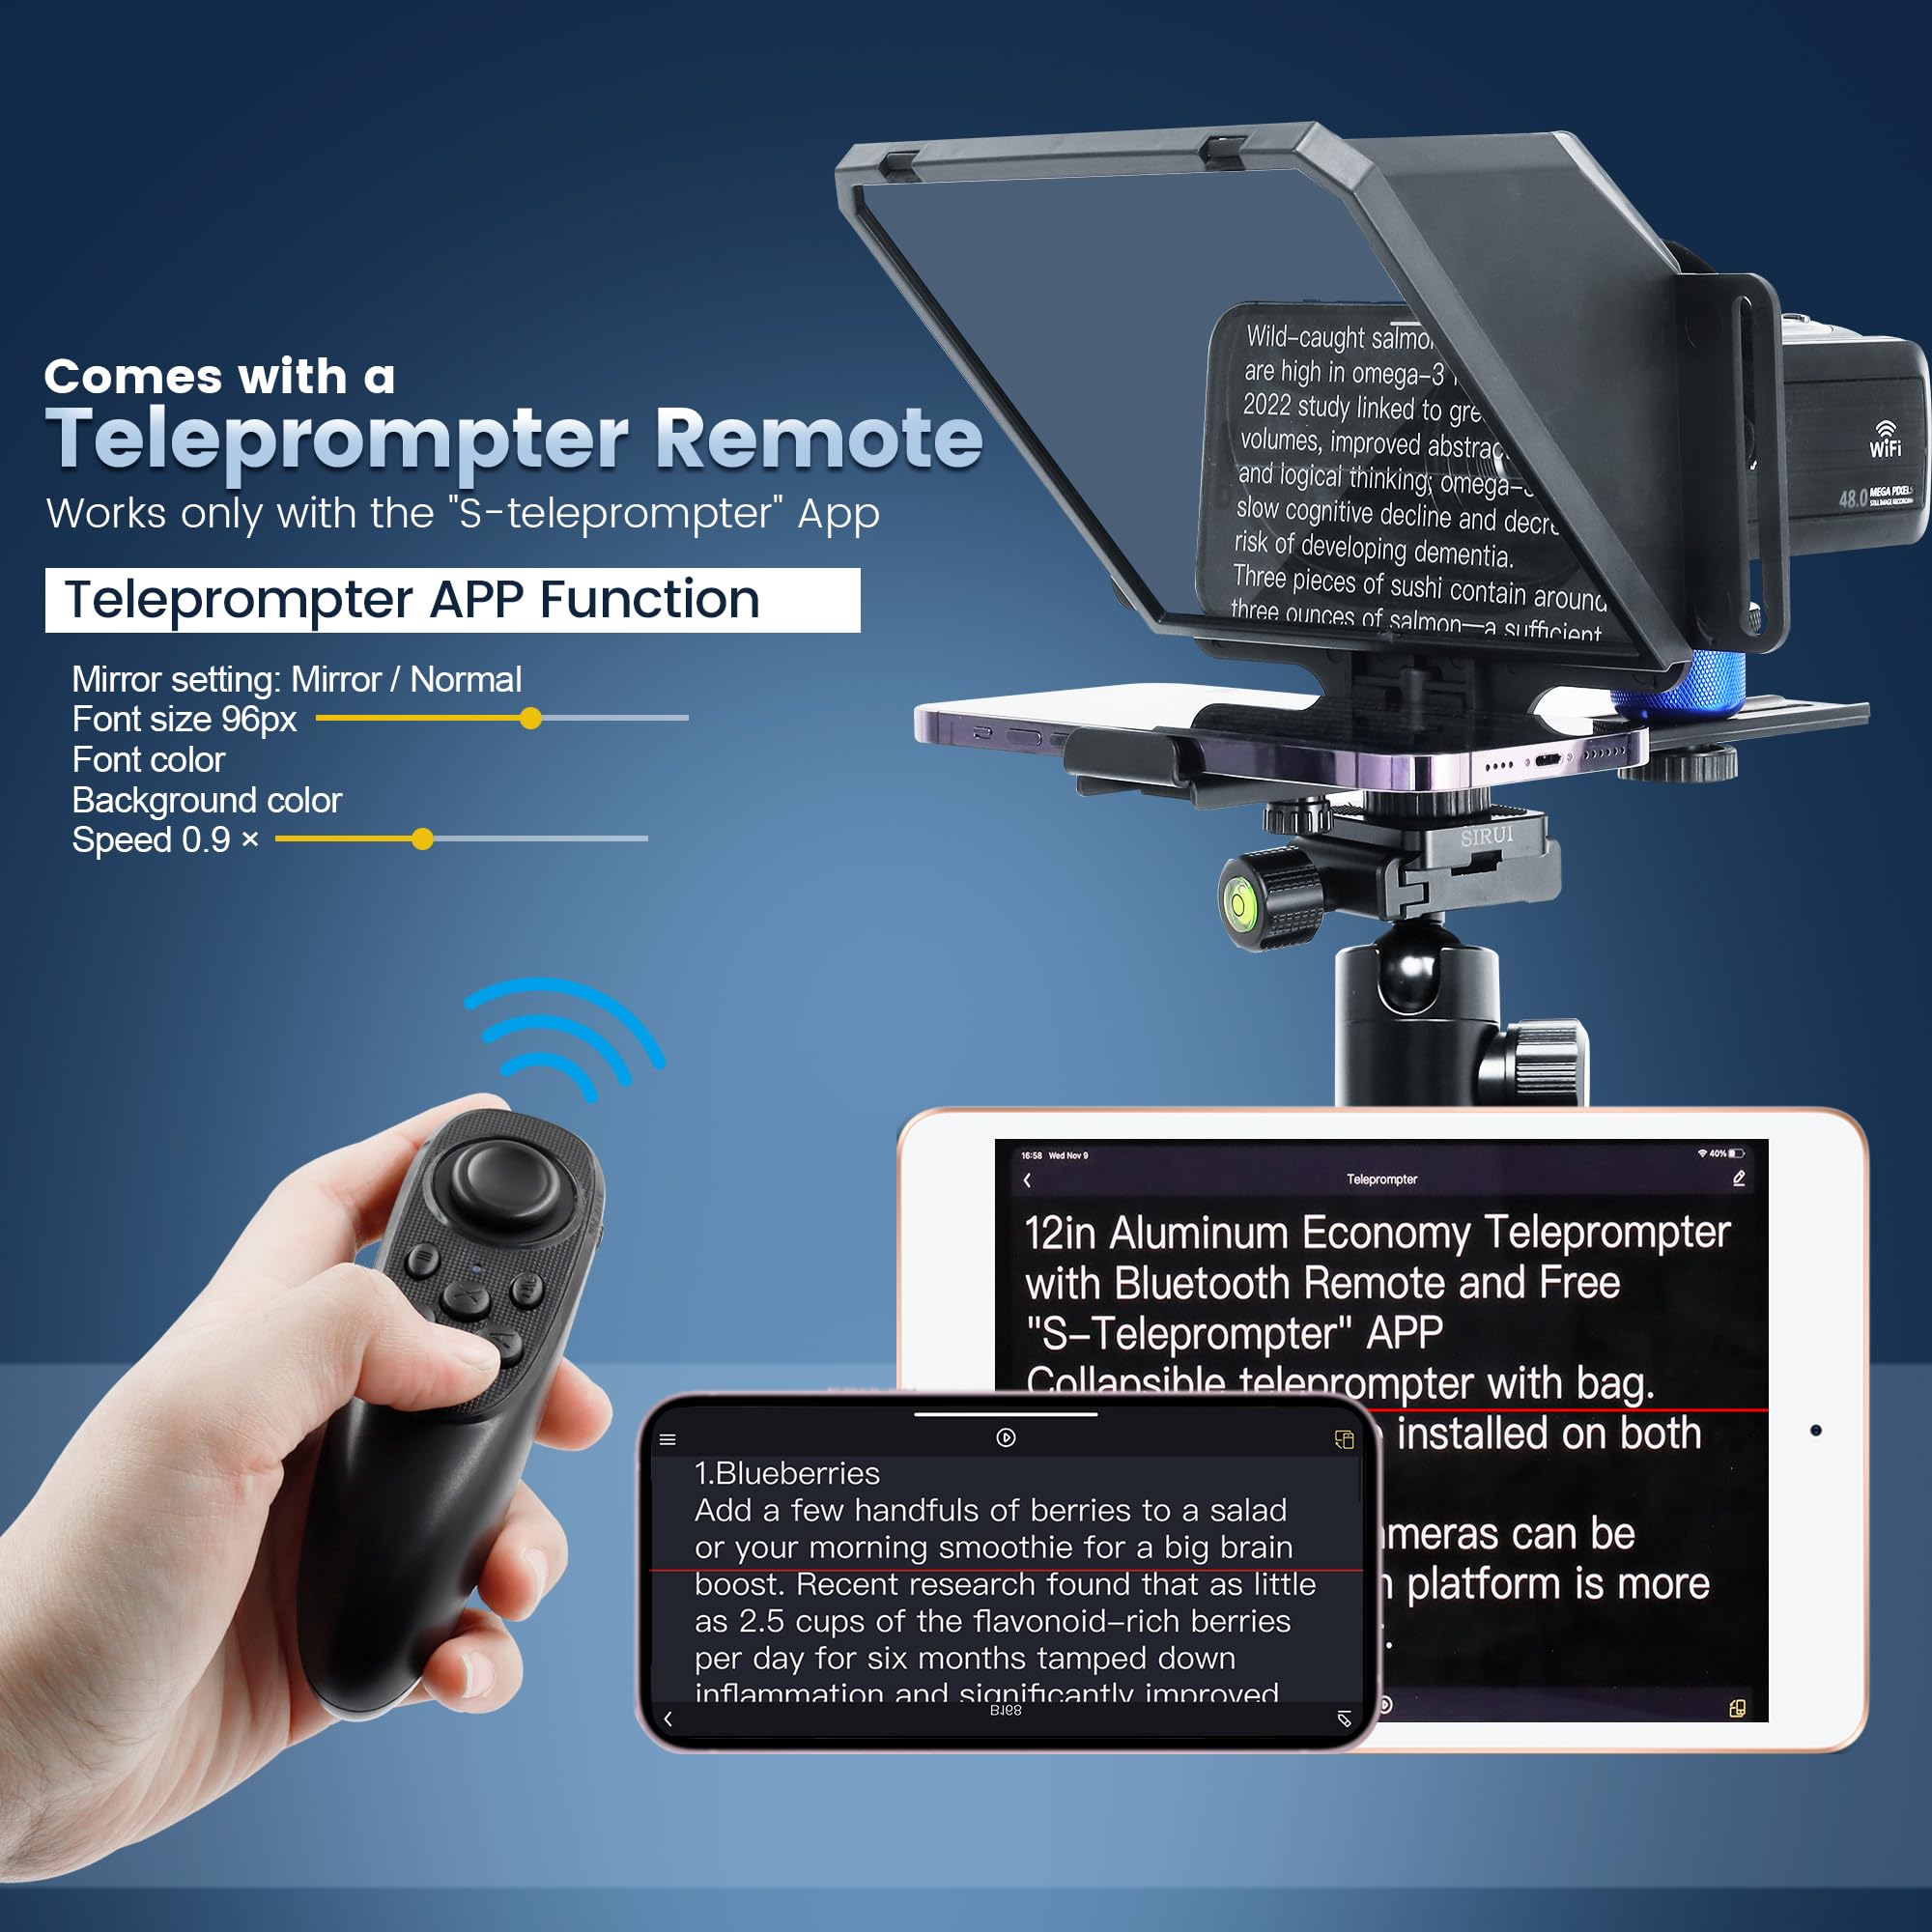 ILOKNZI 7.7 inch Phone Teleprompter Kit Bluetooth Remote Control and Tempered Optical Glass for Smartphone and Camera, iOS/Android Compatible S-Teleprompter App